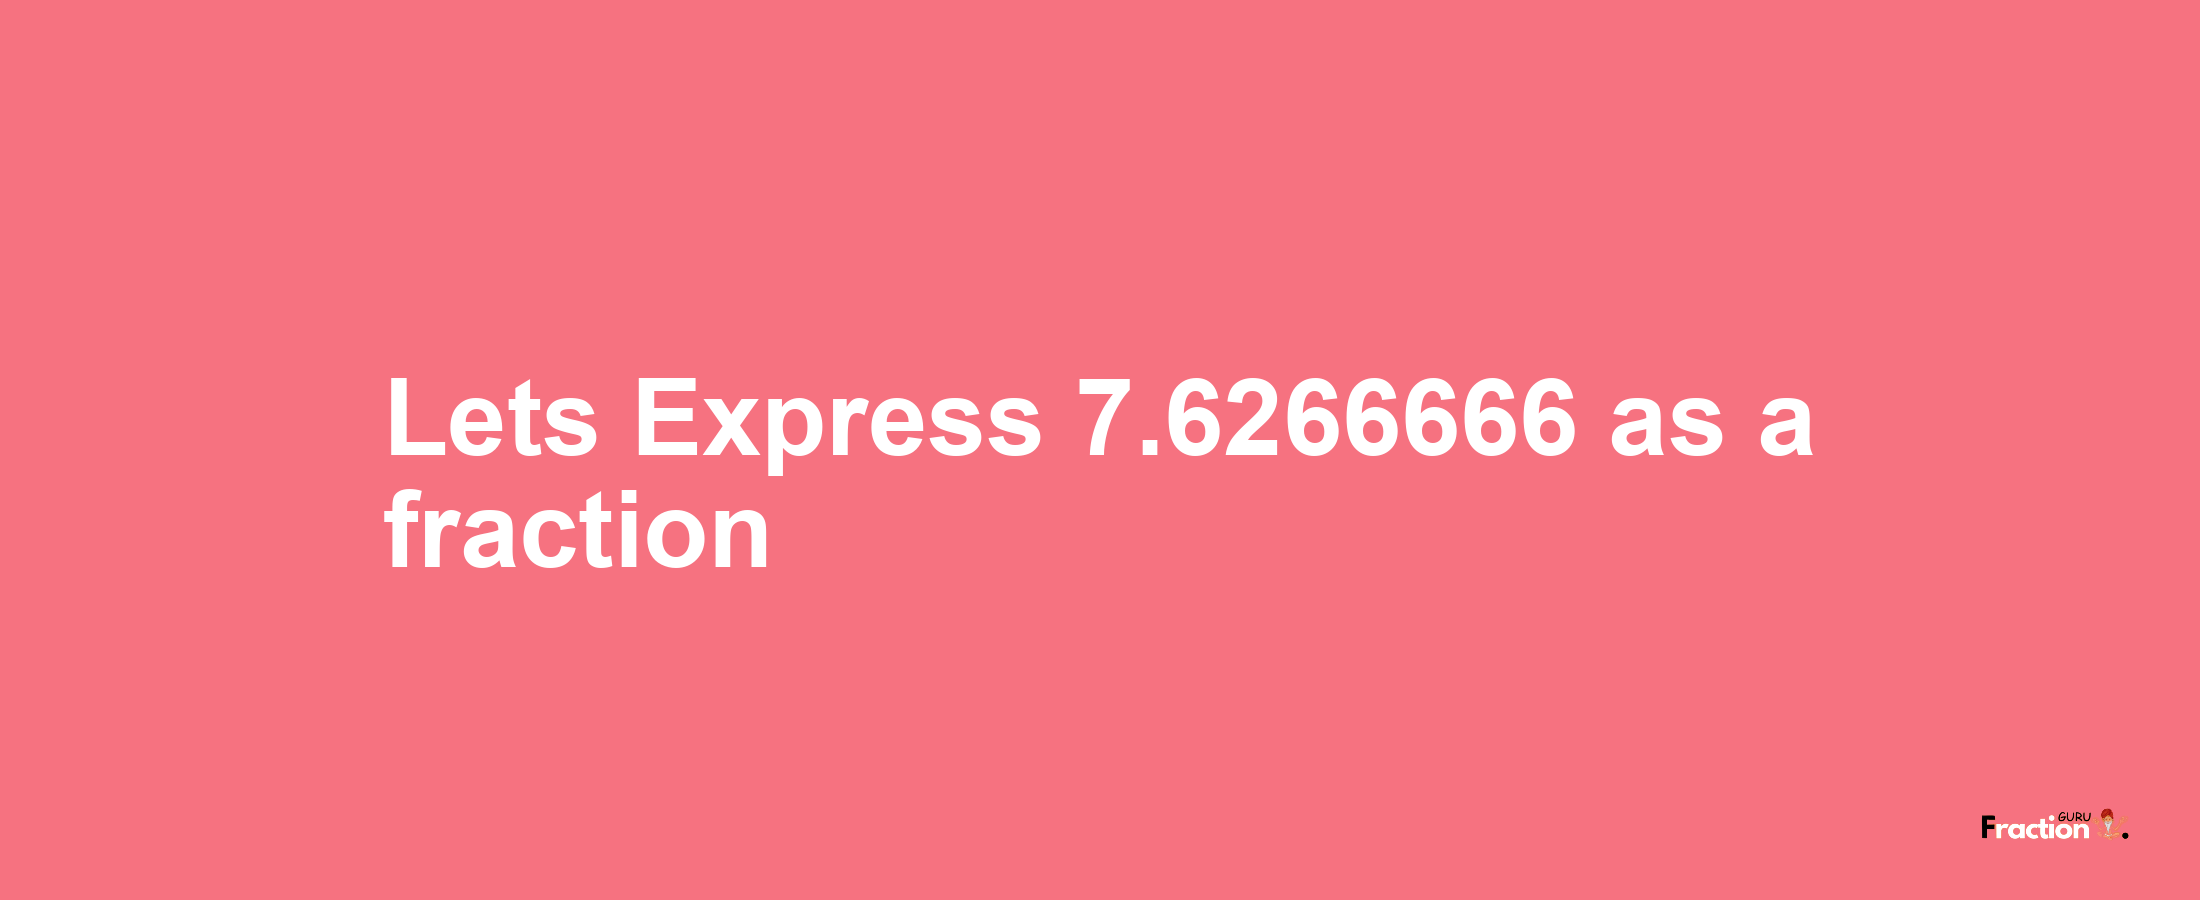 Lets Express 7.6266666 as afraction